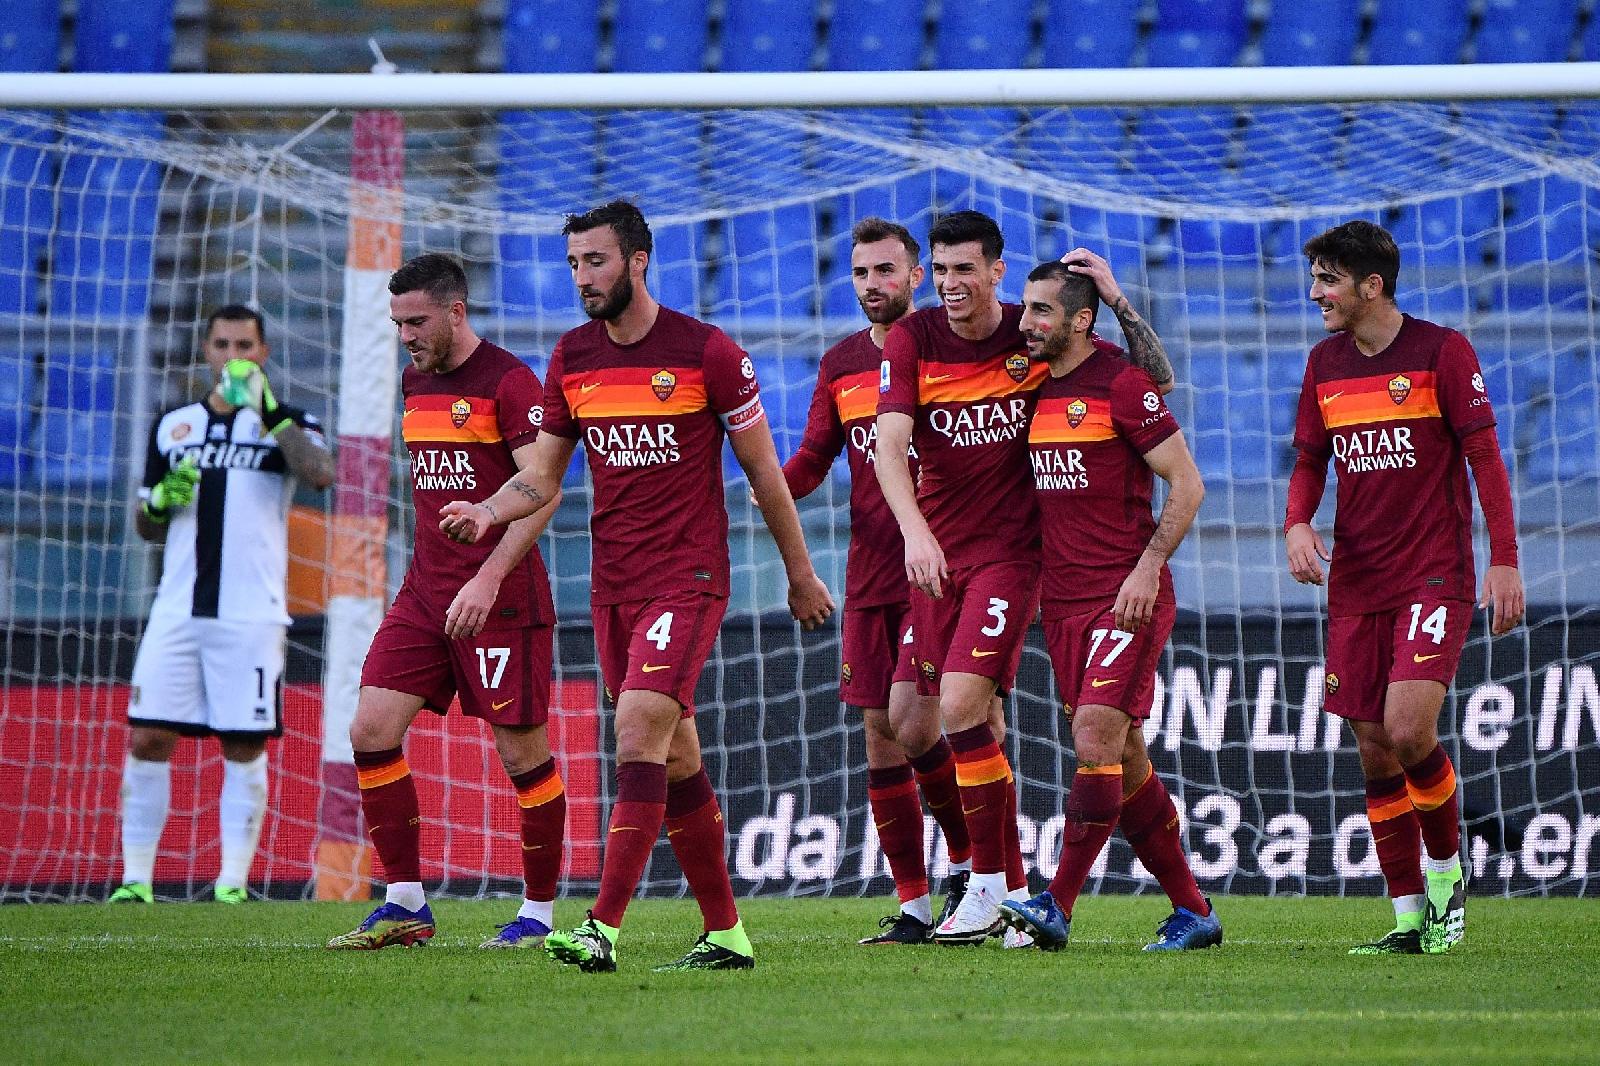 Three first-half goals saw Roma go ten games unbeaten in all competitions against Parma today, owing to yet another "masterclass" from Henrikh Mkhitaryan